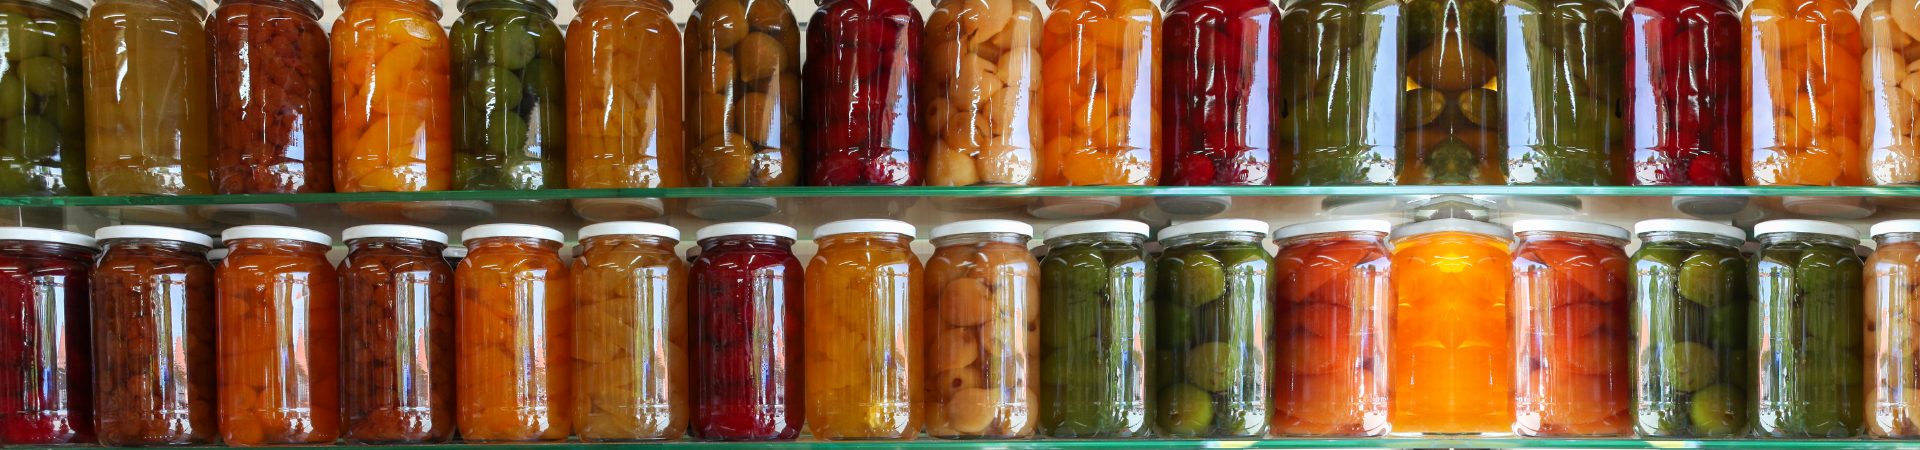 fruits and vegetable canning